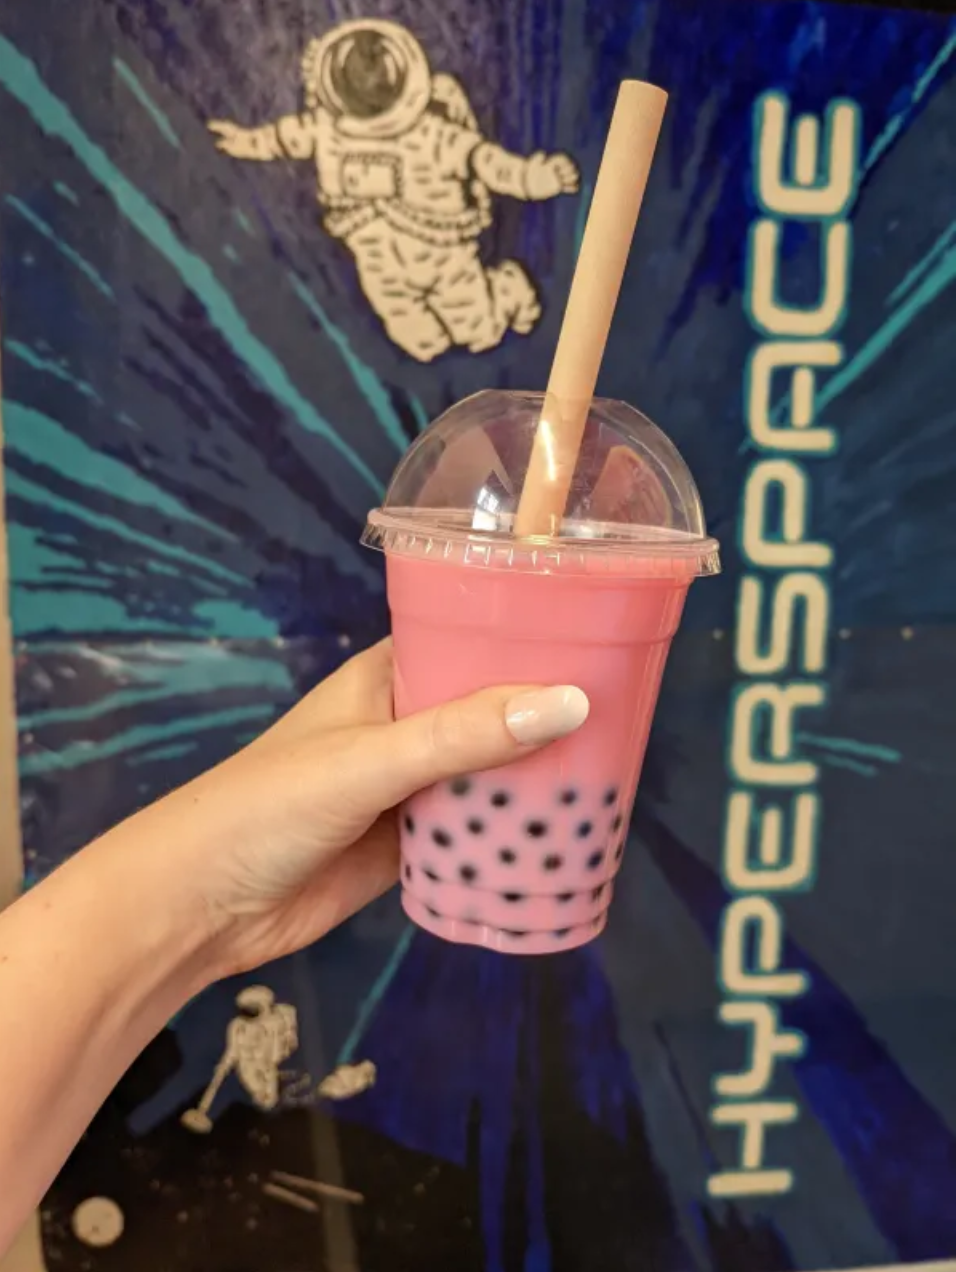 Hyperspace Paignton Celebrates Their First Anniversary With Bubble Tea Taster Workshops